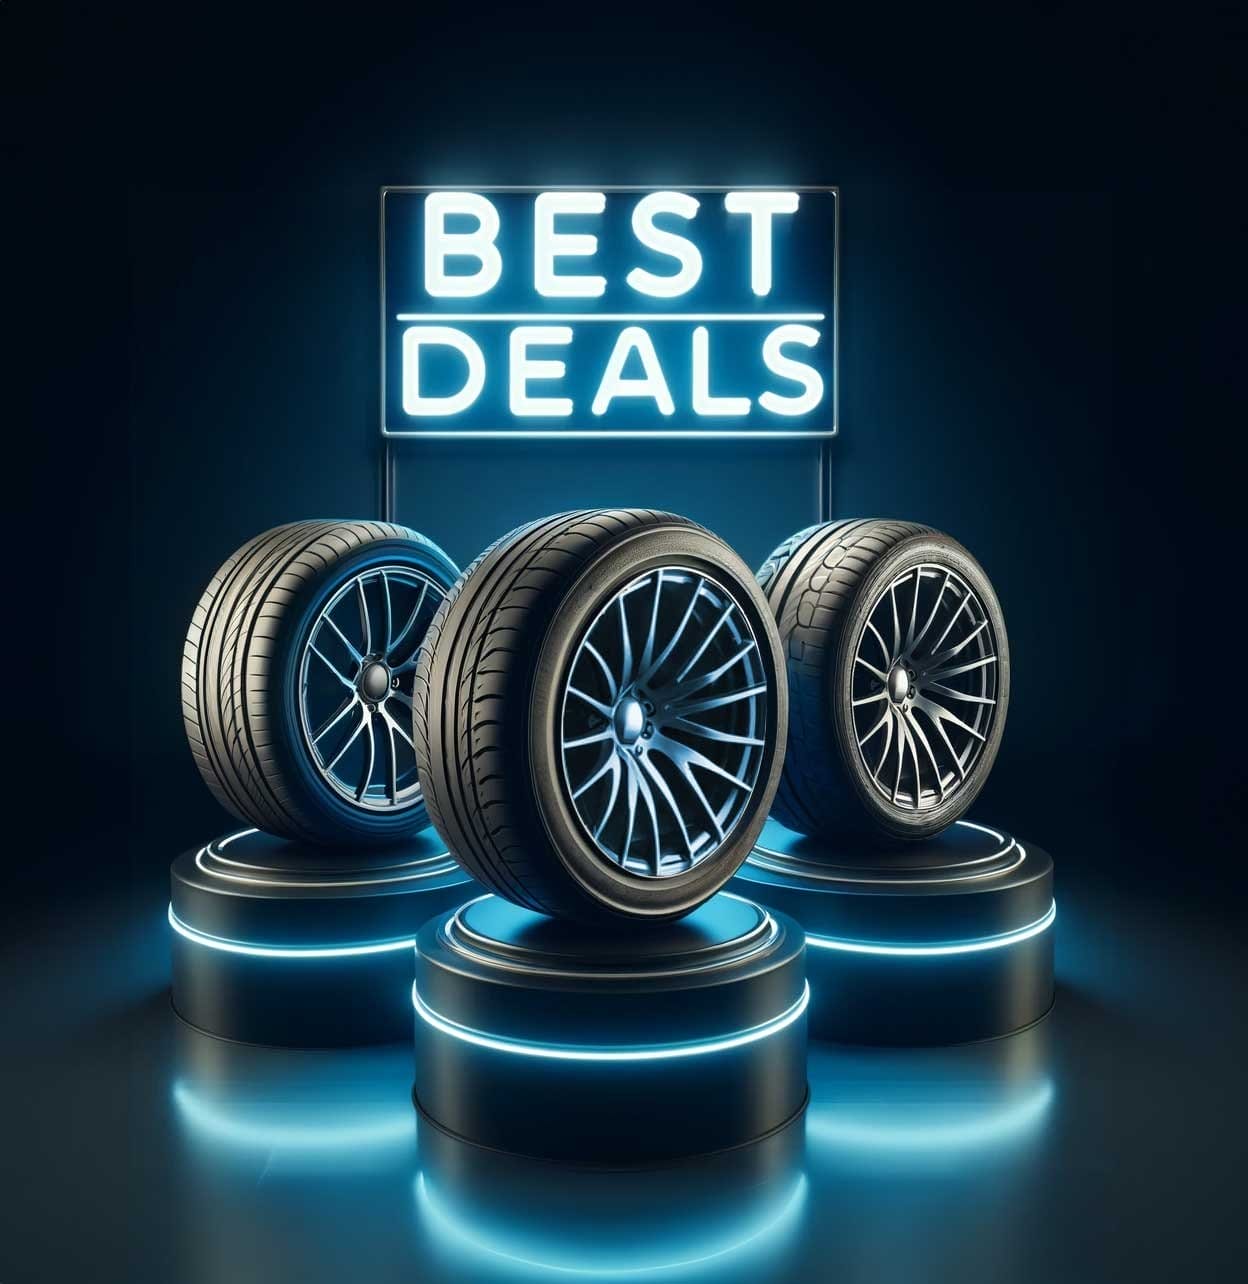 Discover unbeatable pricing on top tire brands